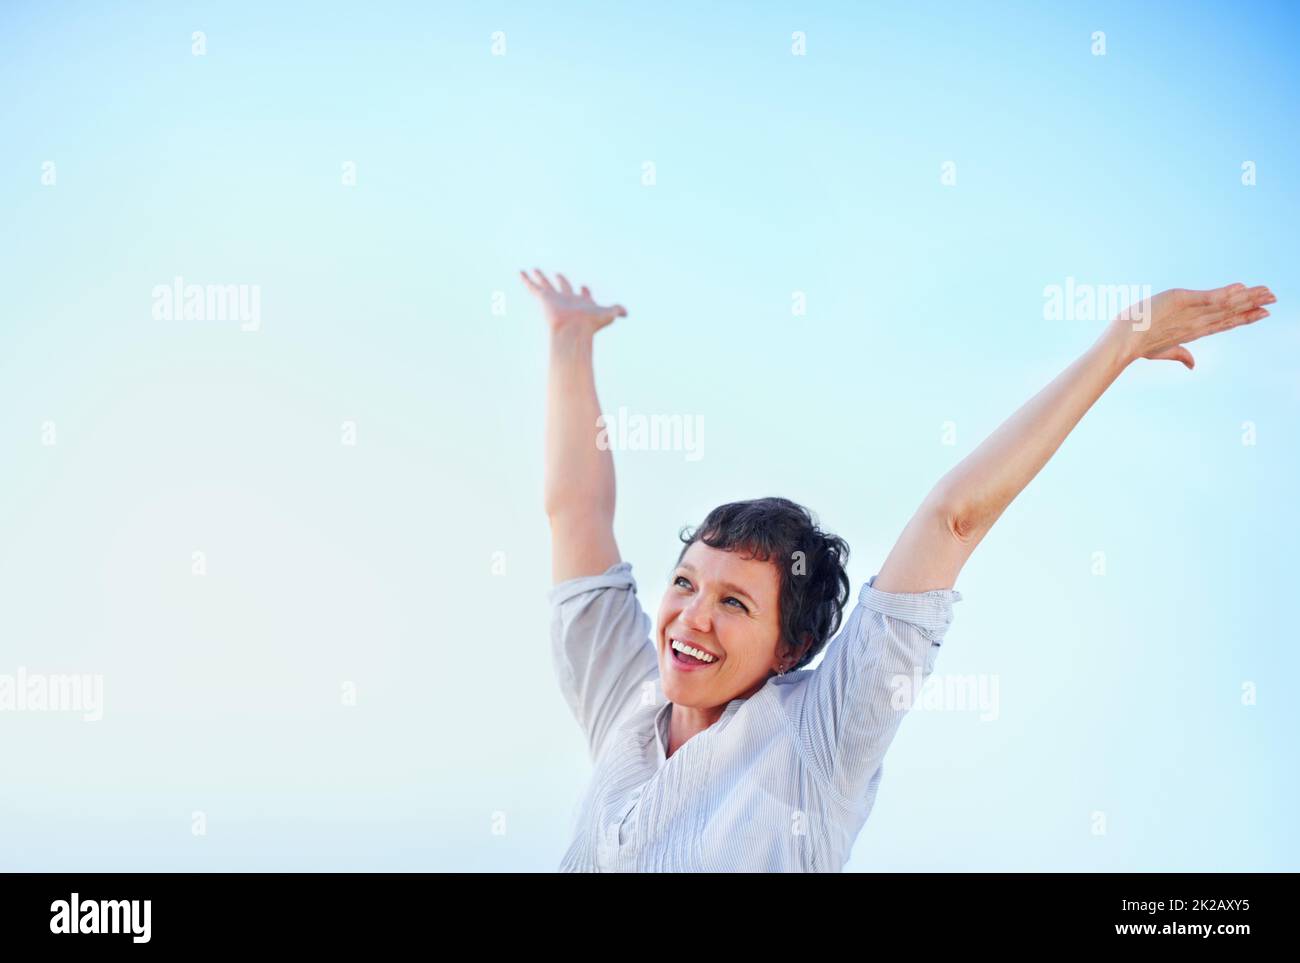 Pure joy. Happy mature woman enjoying freedom against blue sky with arms raised. Stock Photo